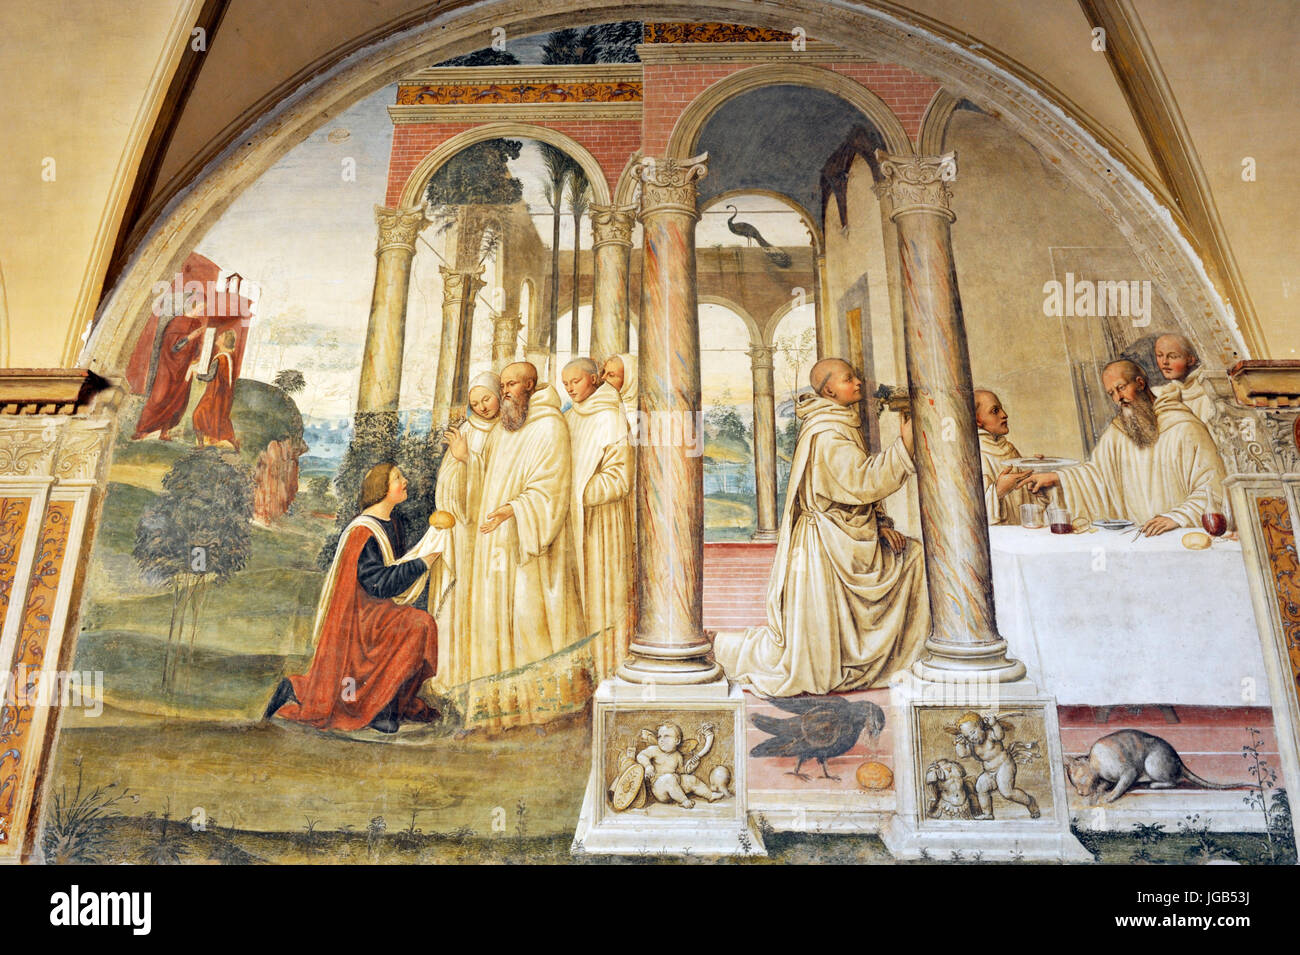 Renaissance frescos, st Benedict life, painting by Il Sodoma, South side of Great Cloister, Abbey of Monte Oliveto Maggiore, Tuscany, Italy Stock Photo